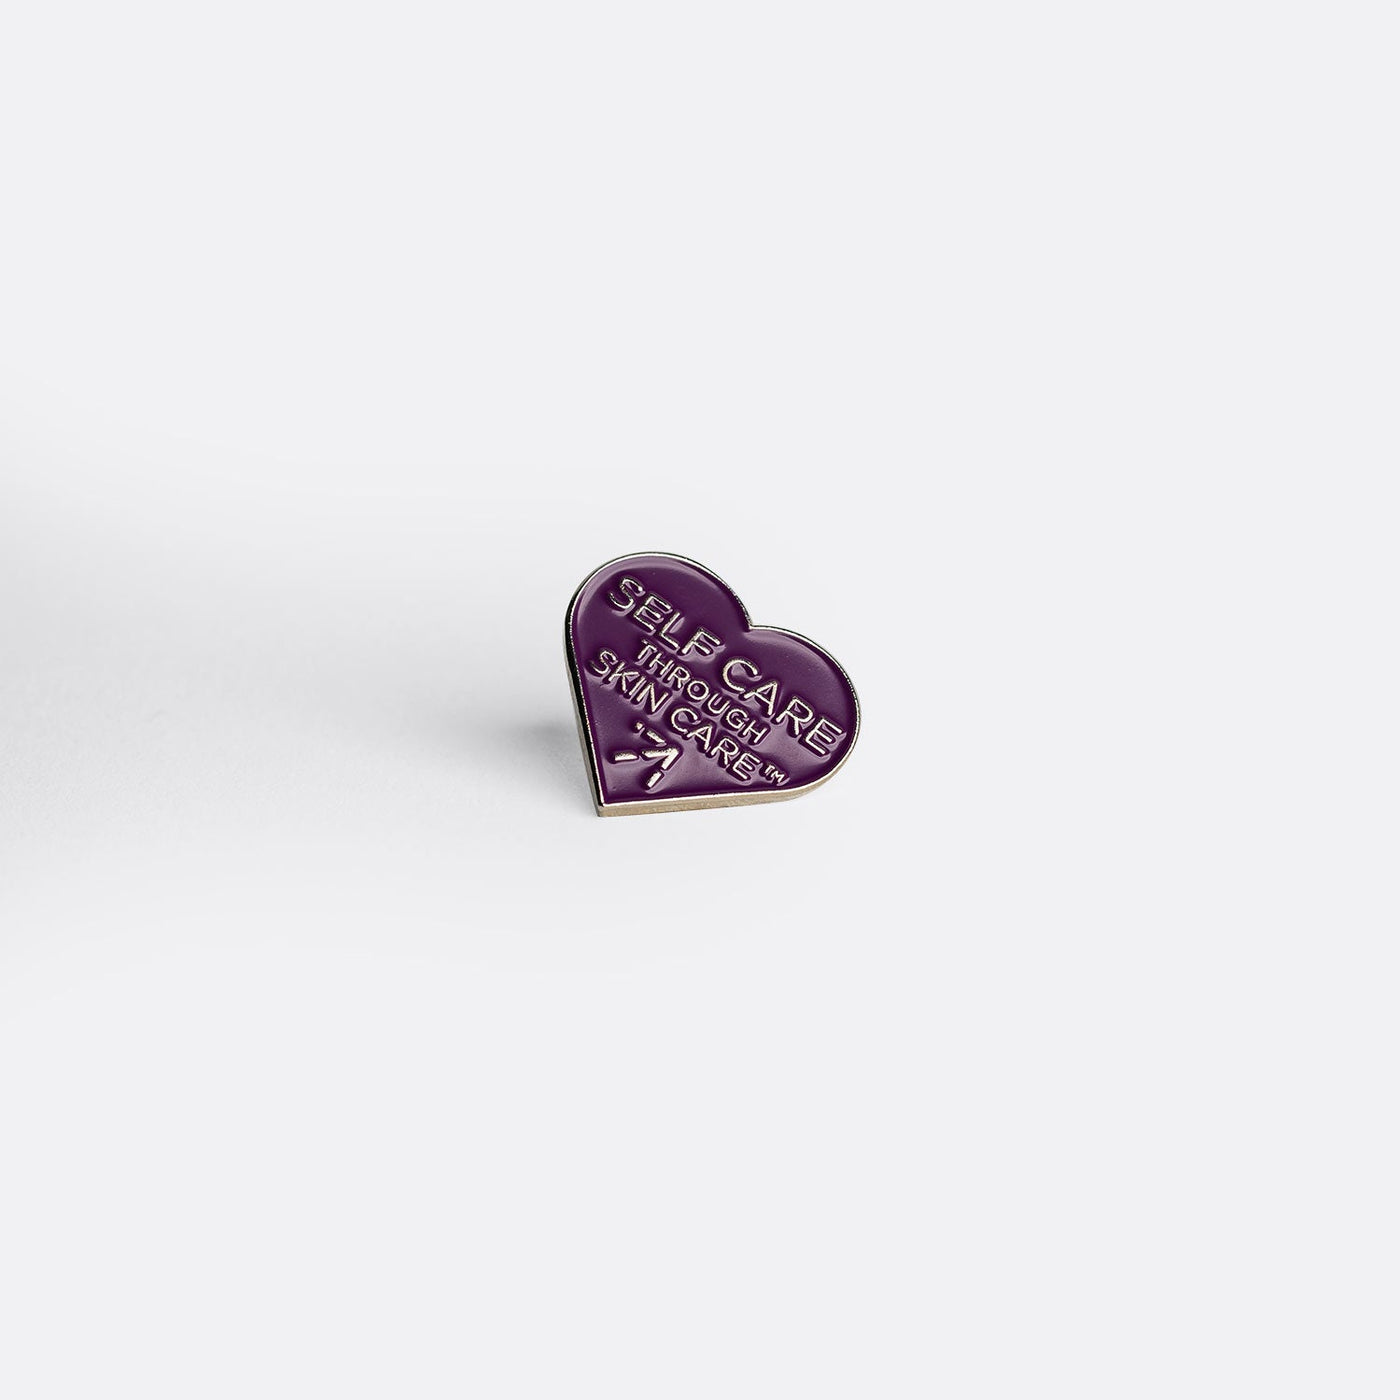 Alchimie Forever's brand new "self care through skin care" purple heart pin.